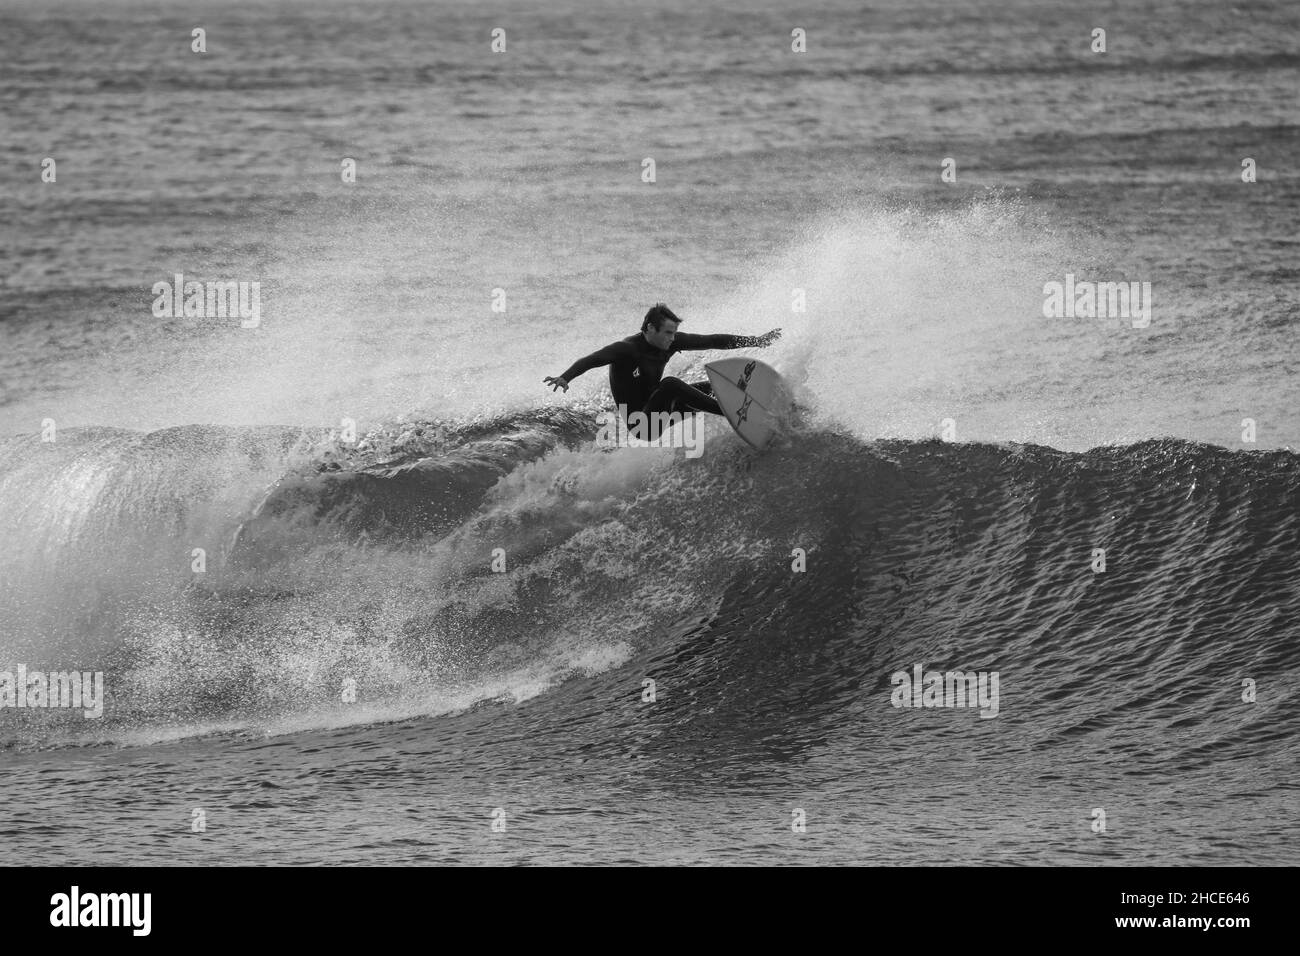 Surfer on a perfect wave at sunny day Stock Photo